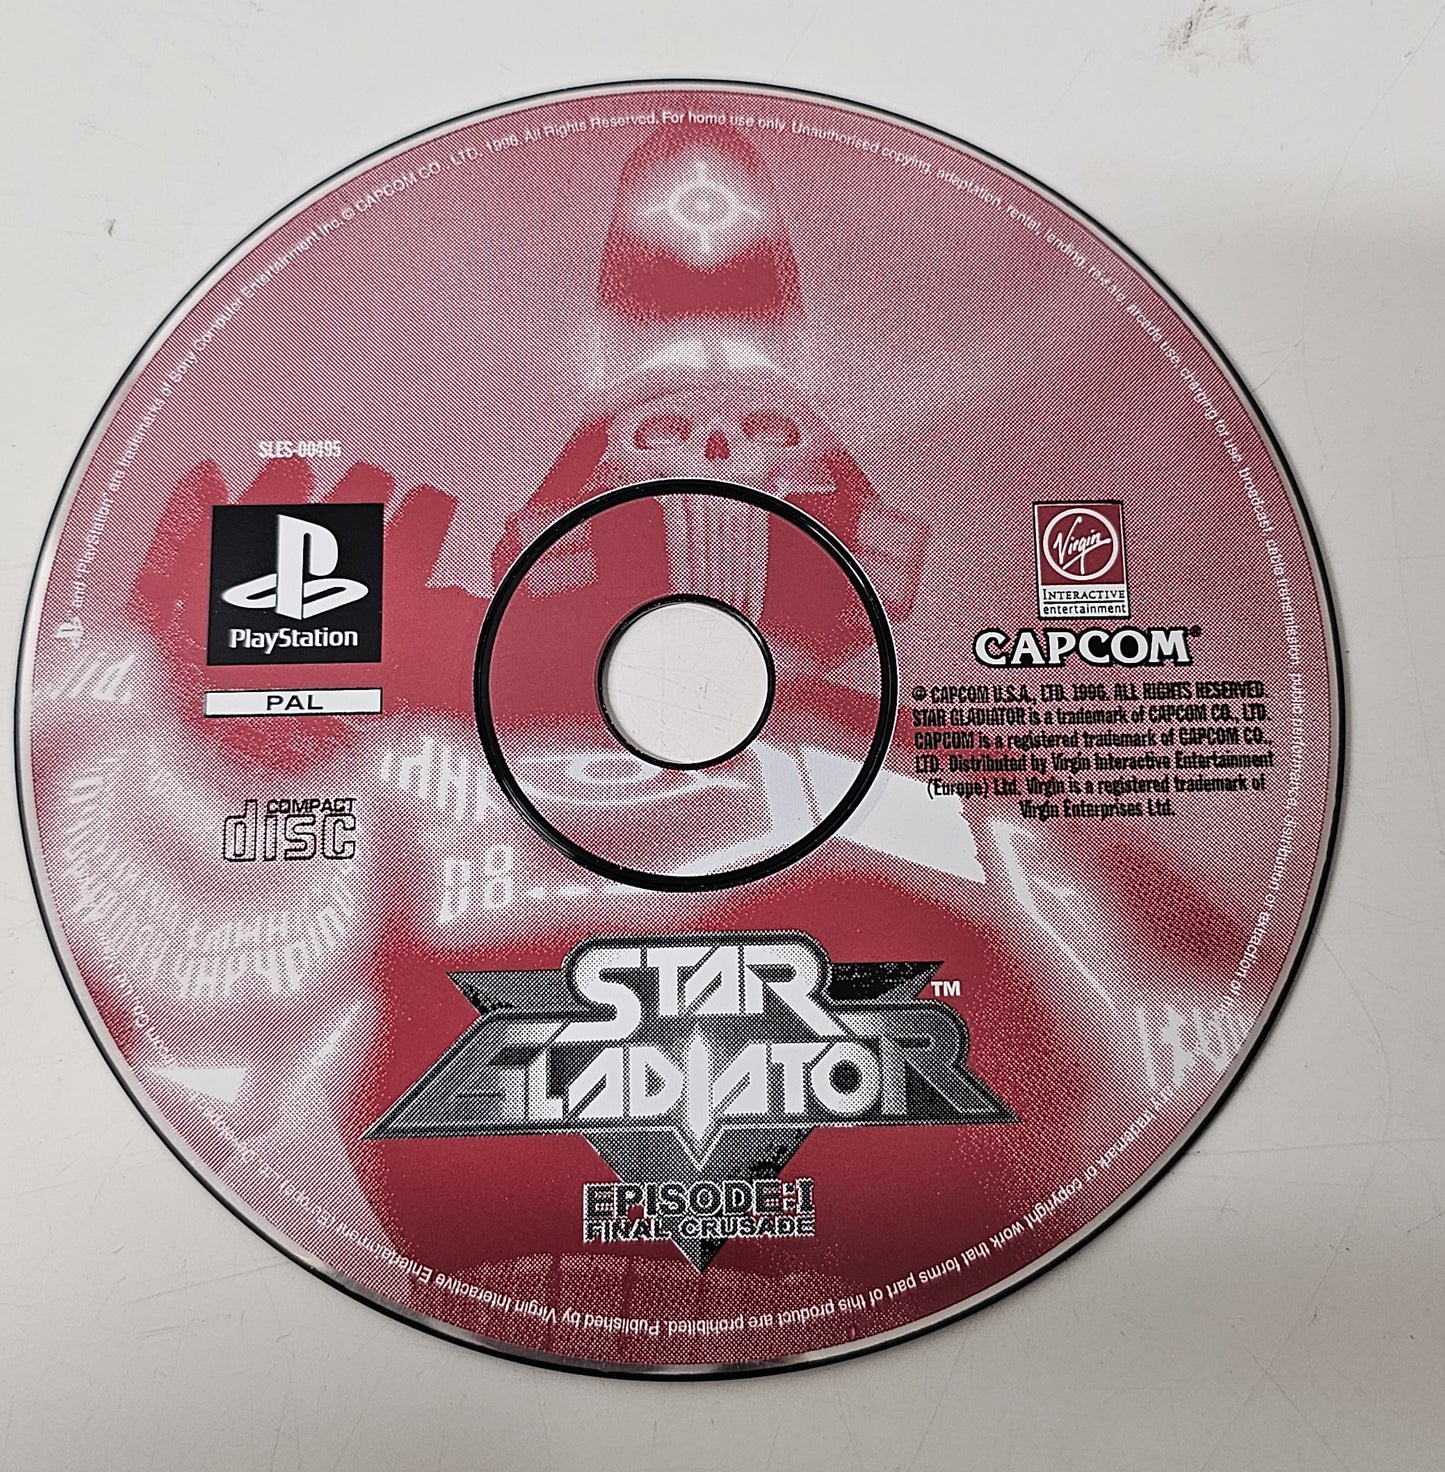 PS1 Playstation 1  Star Gladiator Episode 1 Final Crusade (Disc only)